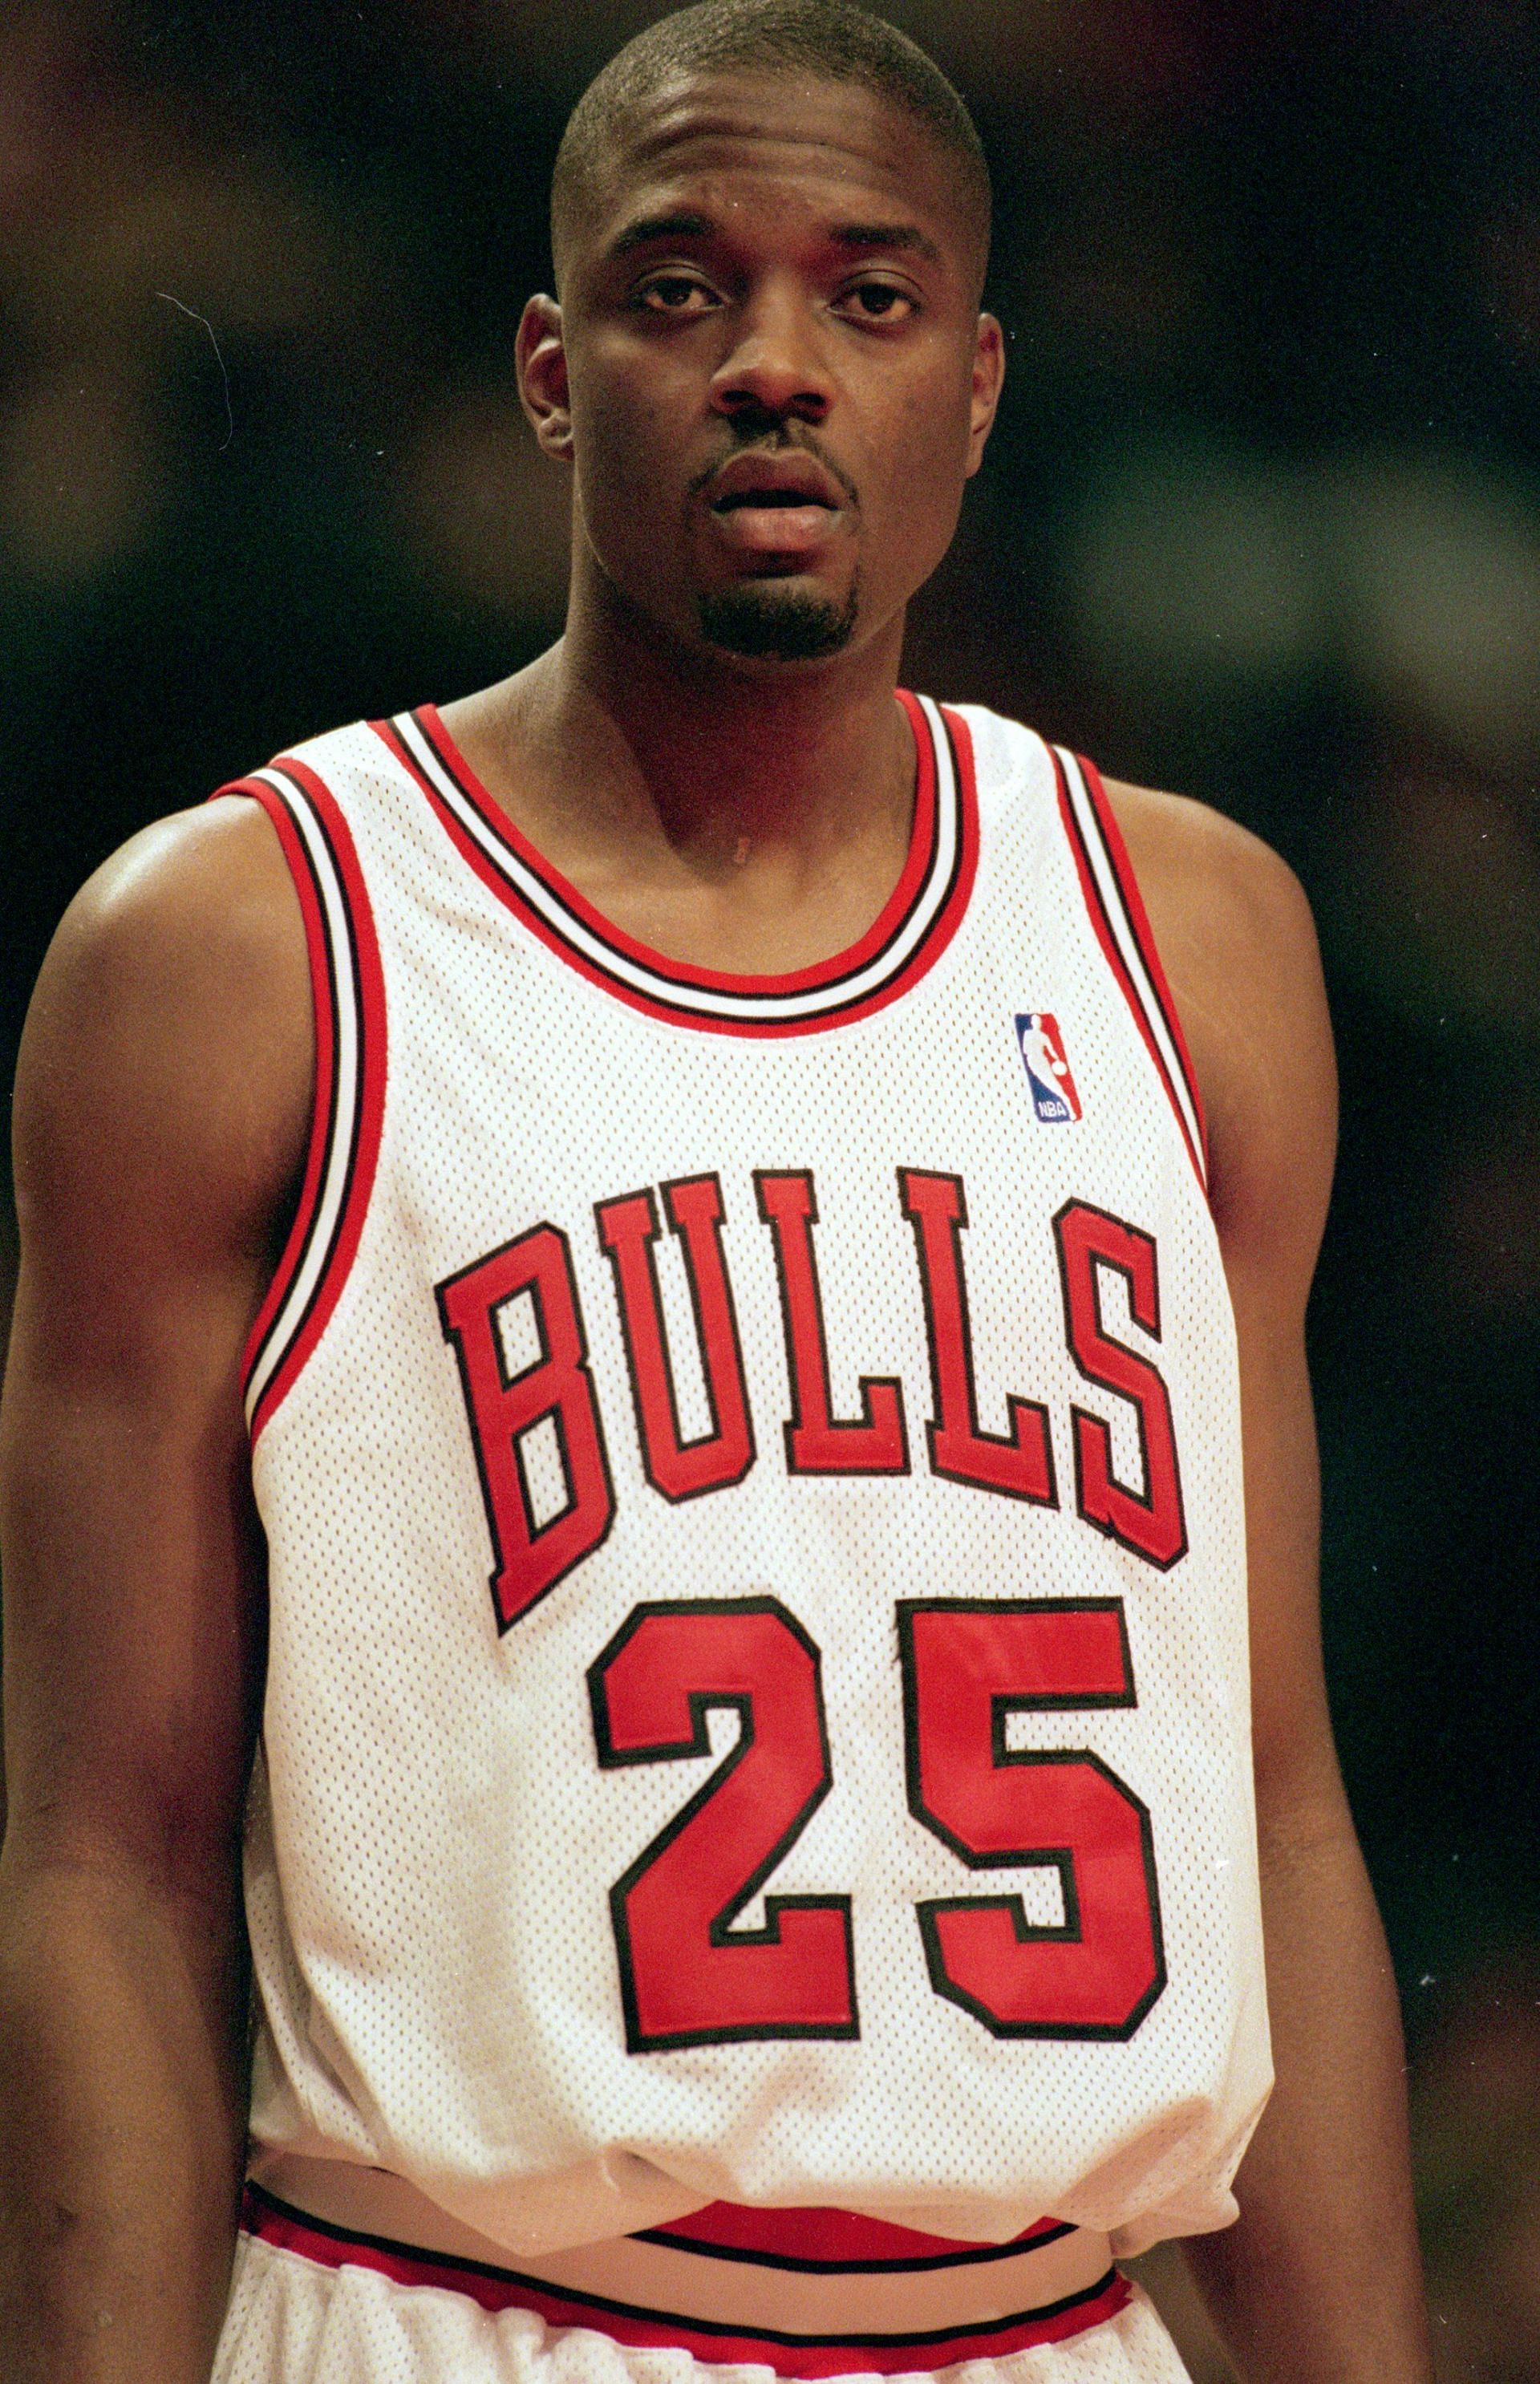 Corey Benjamin #25 of the Chicago Bulls, is the father of Cori.